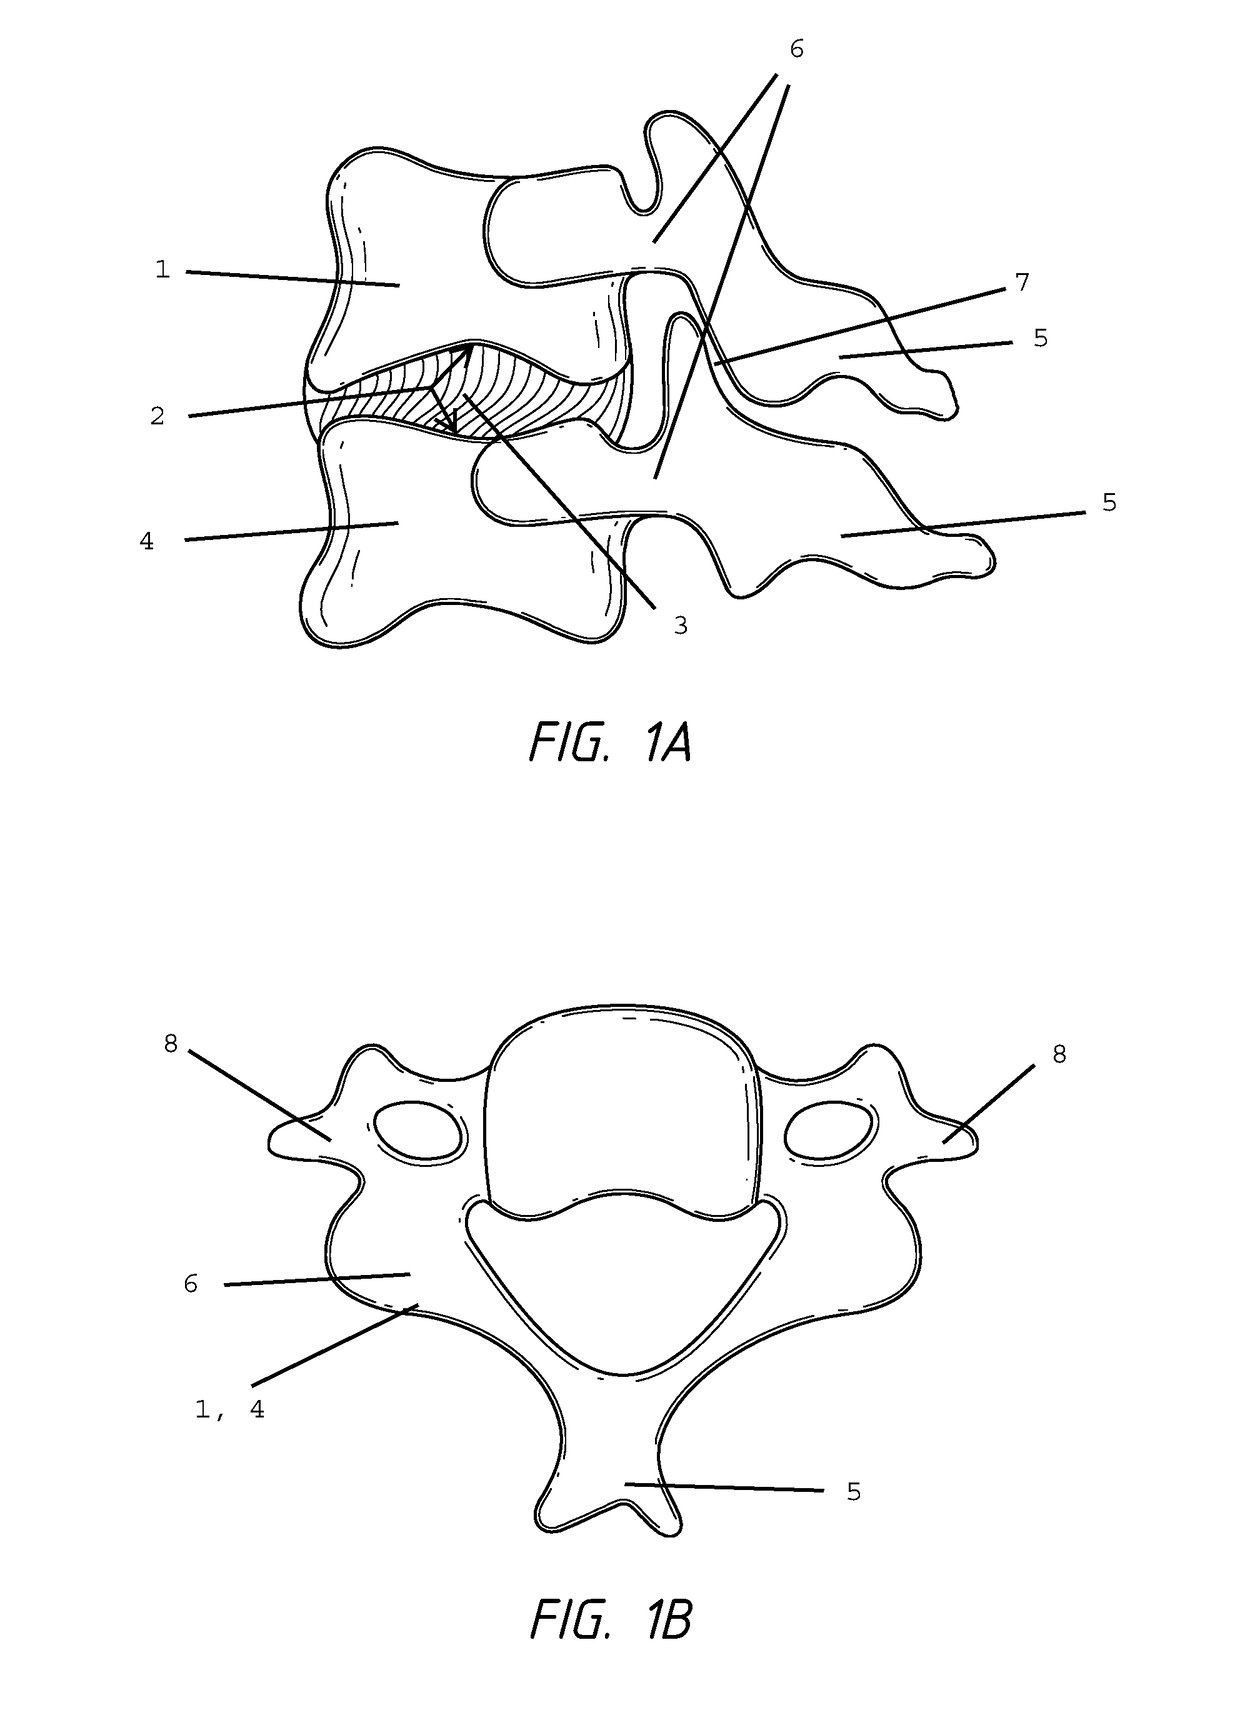 Intervertebral disc implant and method for restoring function to a damaged functional spinal unit